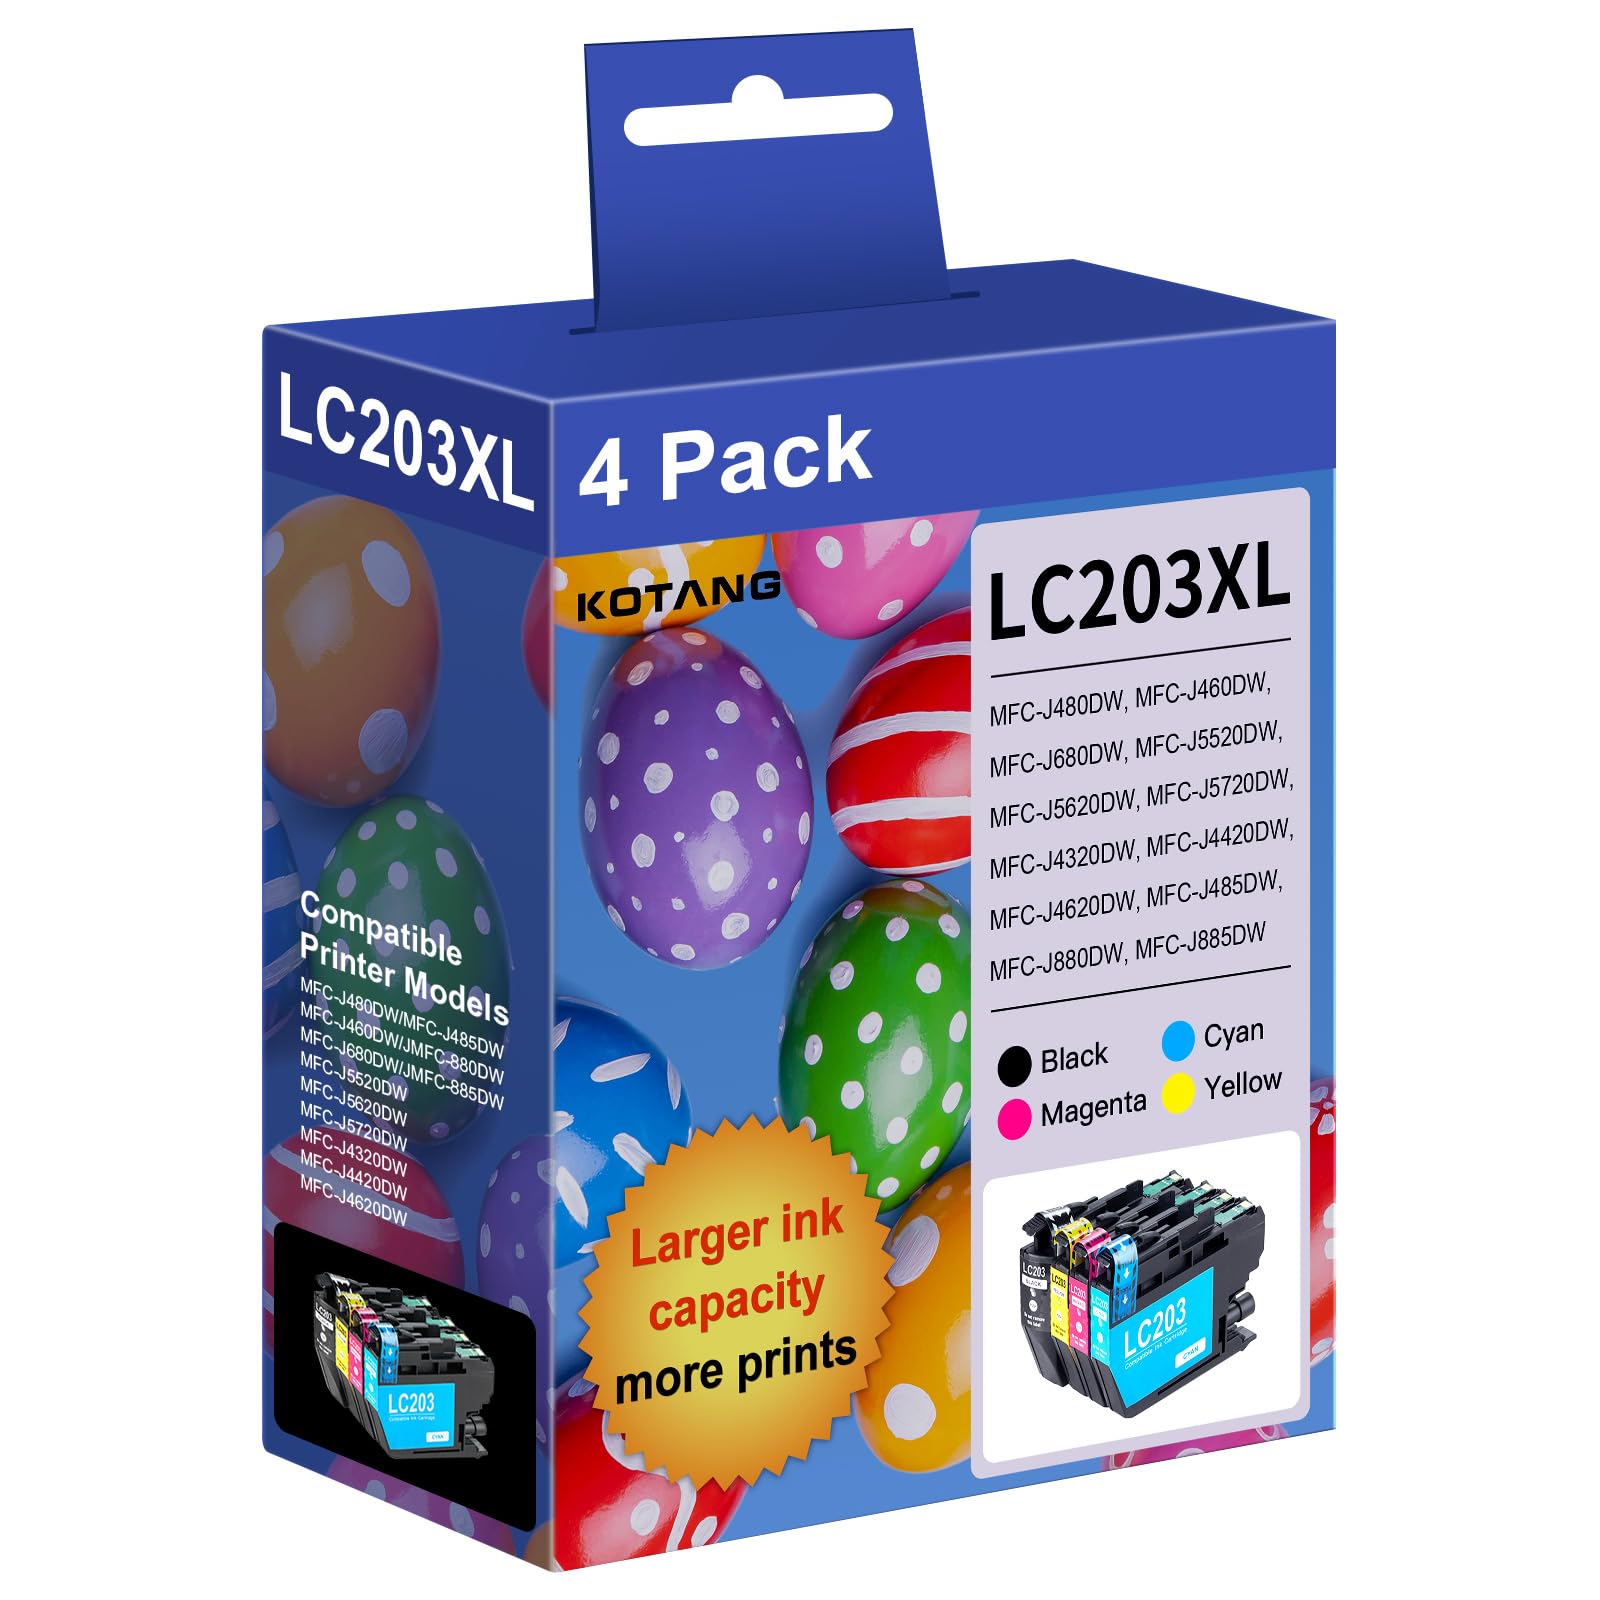 LC203 LC201 Ink Cartridges Compatible for Brother LC203XL Ink LC201 High Yield Work with Brother MFC-J480DW MFC-J880DW MFC-J4420DW MFC-J680DW MFC-J885DW Printer (Black Cyan Magenta Yellow, 4 Pack)